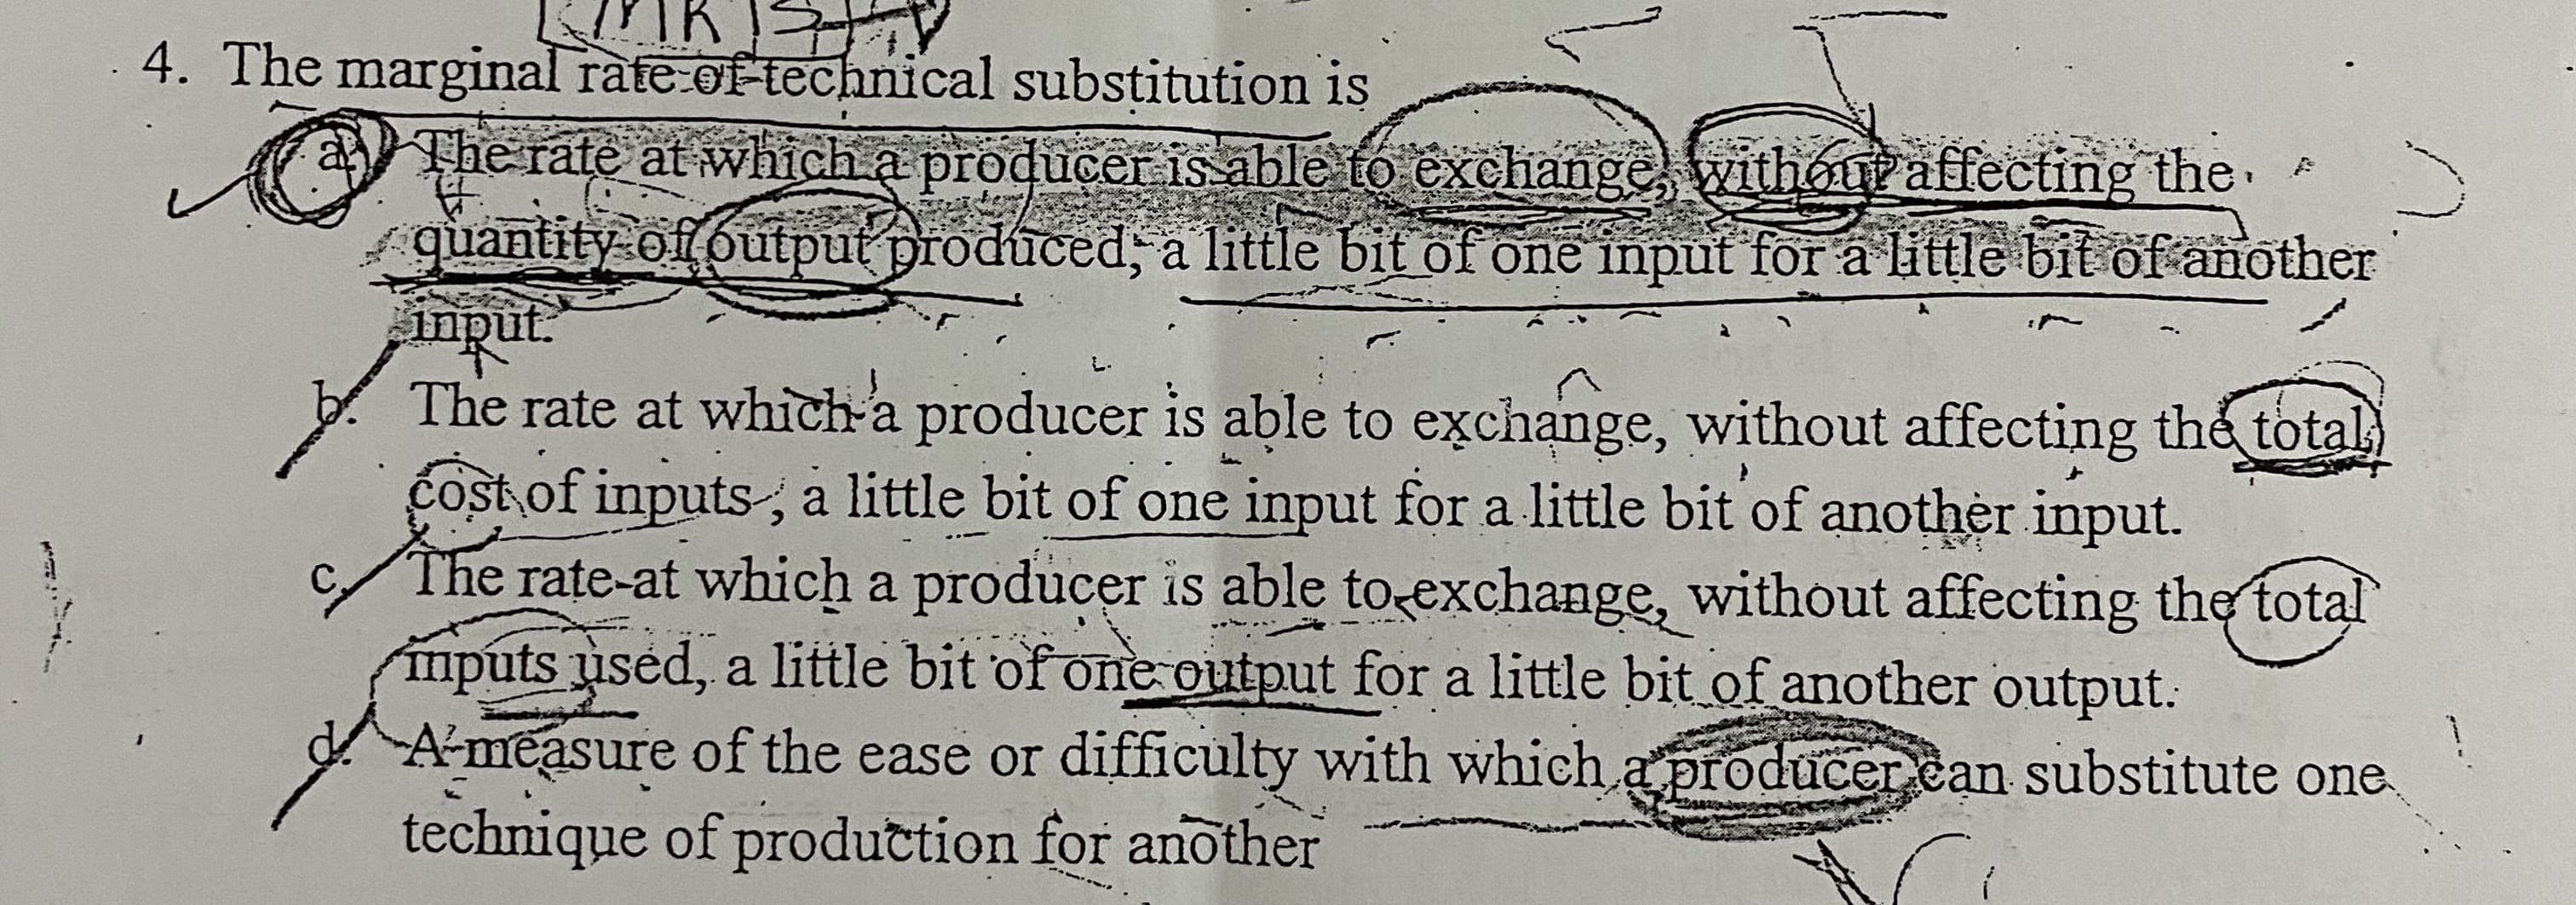 The marginal rate of technical substitution is
